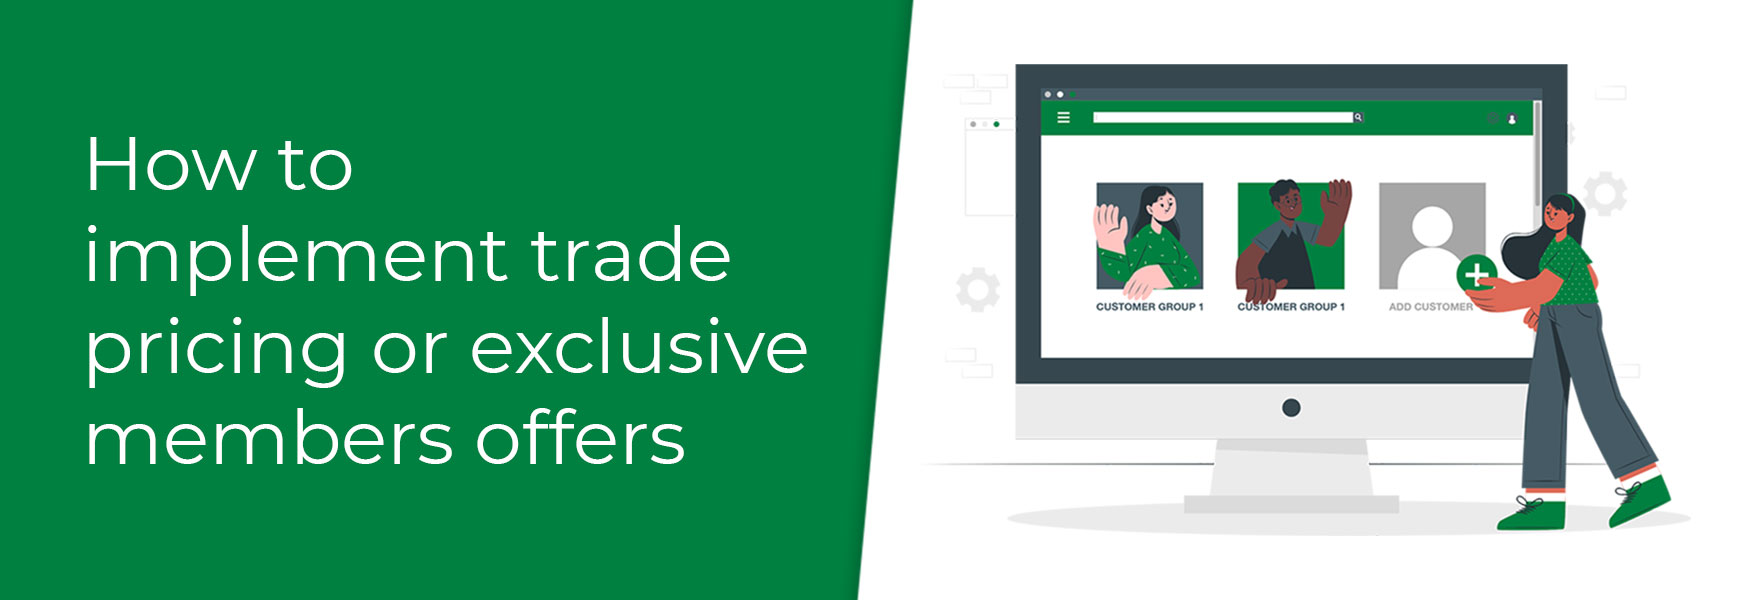 How to implement trade pricing or exclusive member offers